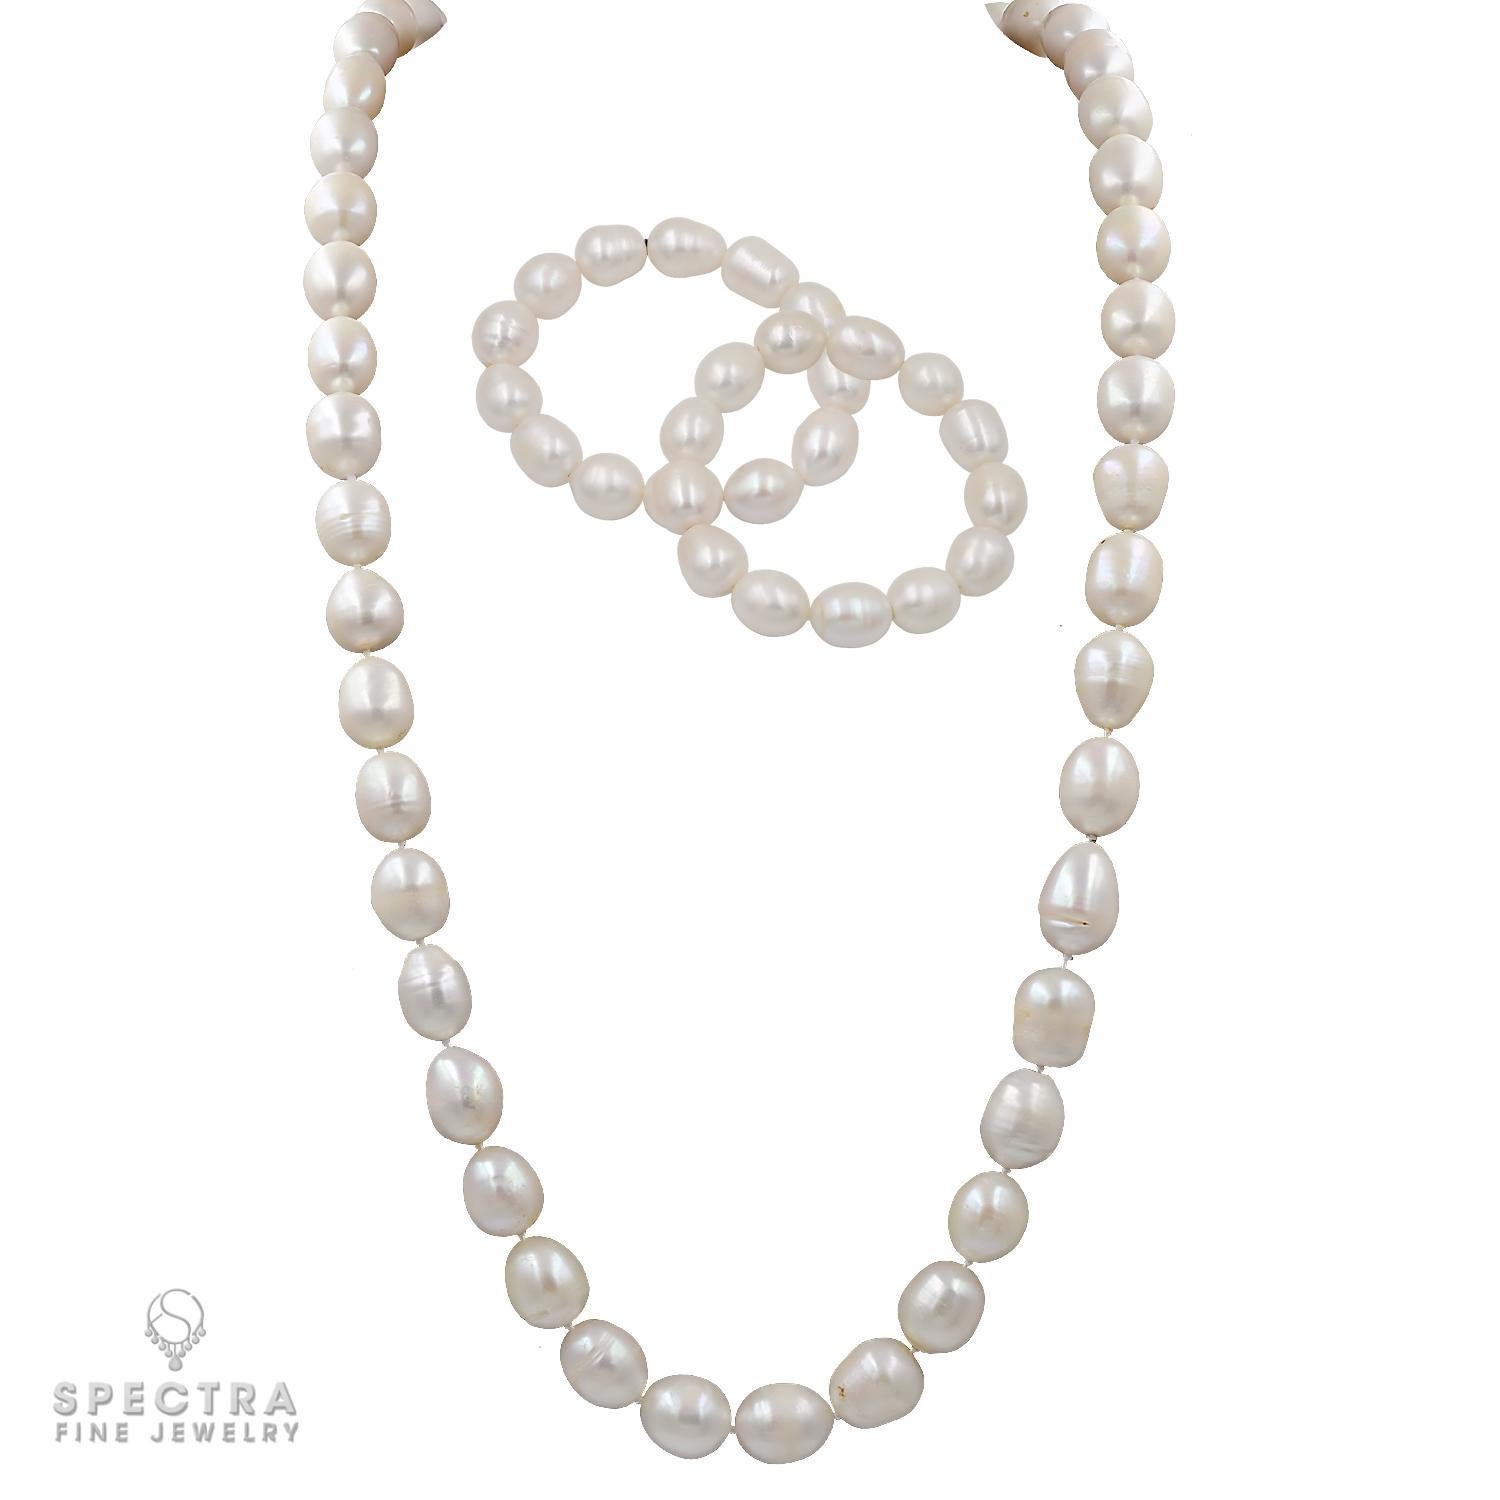 Elegance and opulence converge in this lovely Baroque South Sea Pearl Necklace & Bracelet Set, a testament to the timeless allure of pearls. With 47 lustrous pearls adorning the necklace and 13 pearls in each of the two matching bracelets, this set